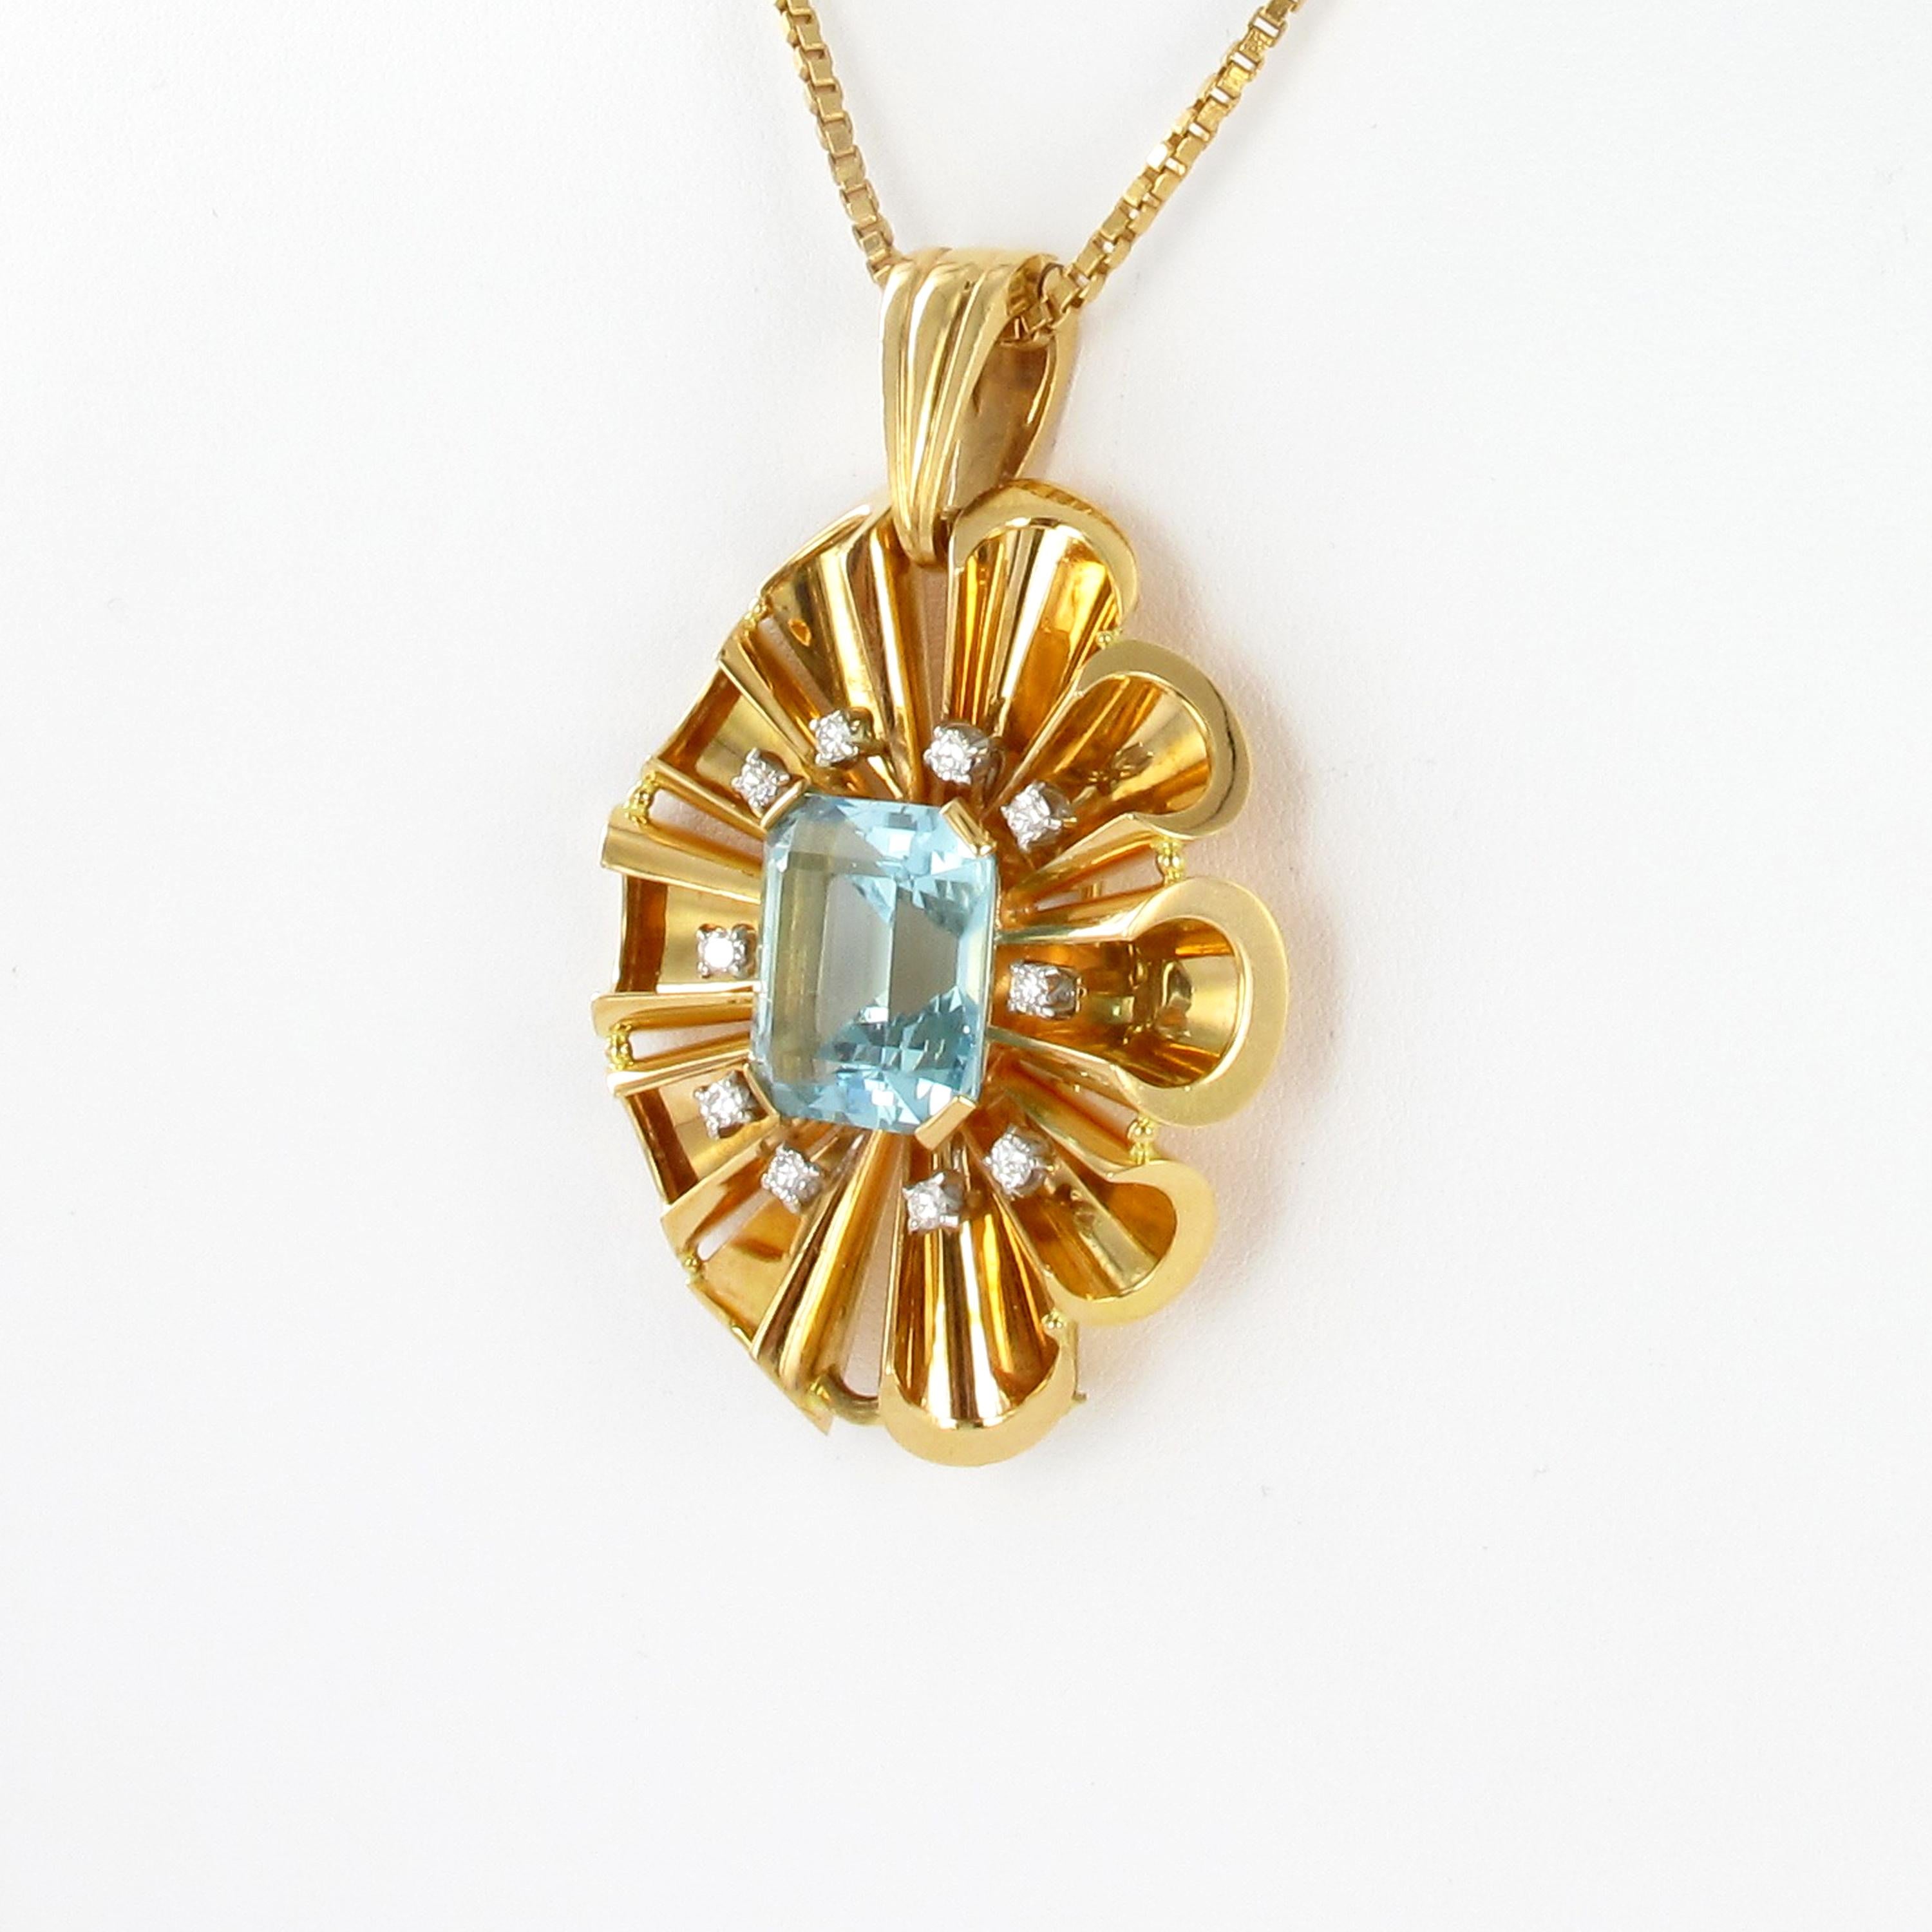 Cool aquamarine and diamond pendant / brooch from the 1960. Outstanding design in red gold 18kt. Center set with an emerald cut aquamarine of approximate 13 ct. Surrounded by 10 full brilliant cut diamonds of approximate 0.30 ct in total. Additional